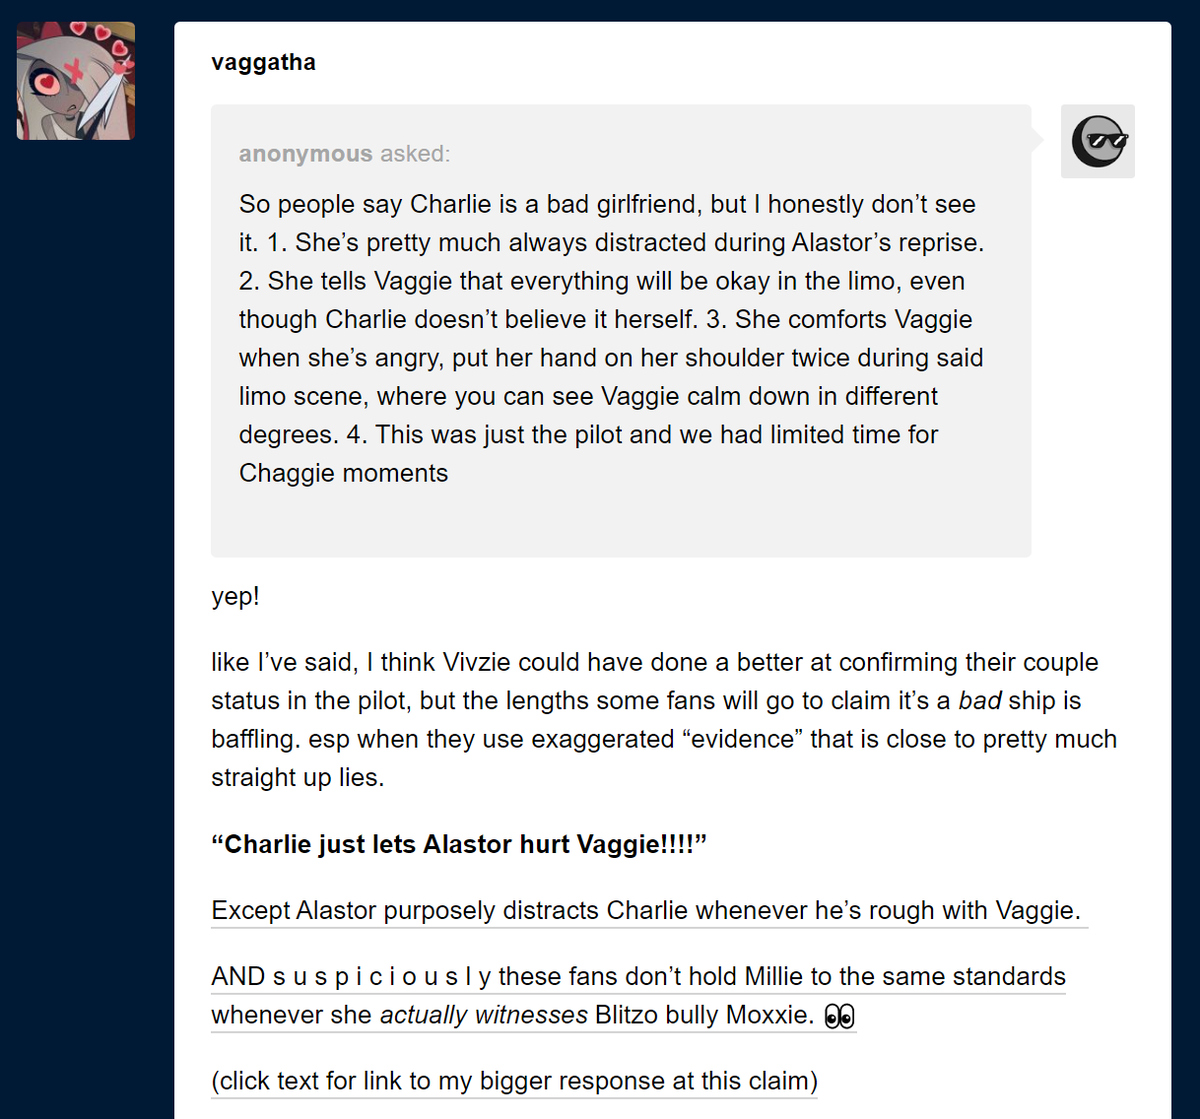  #chaggie Refuting popular anti-Chaggie claims(obvious warning for mild fandom discourse)Part 1